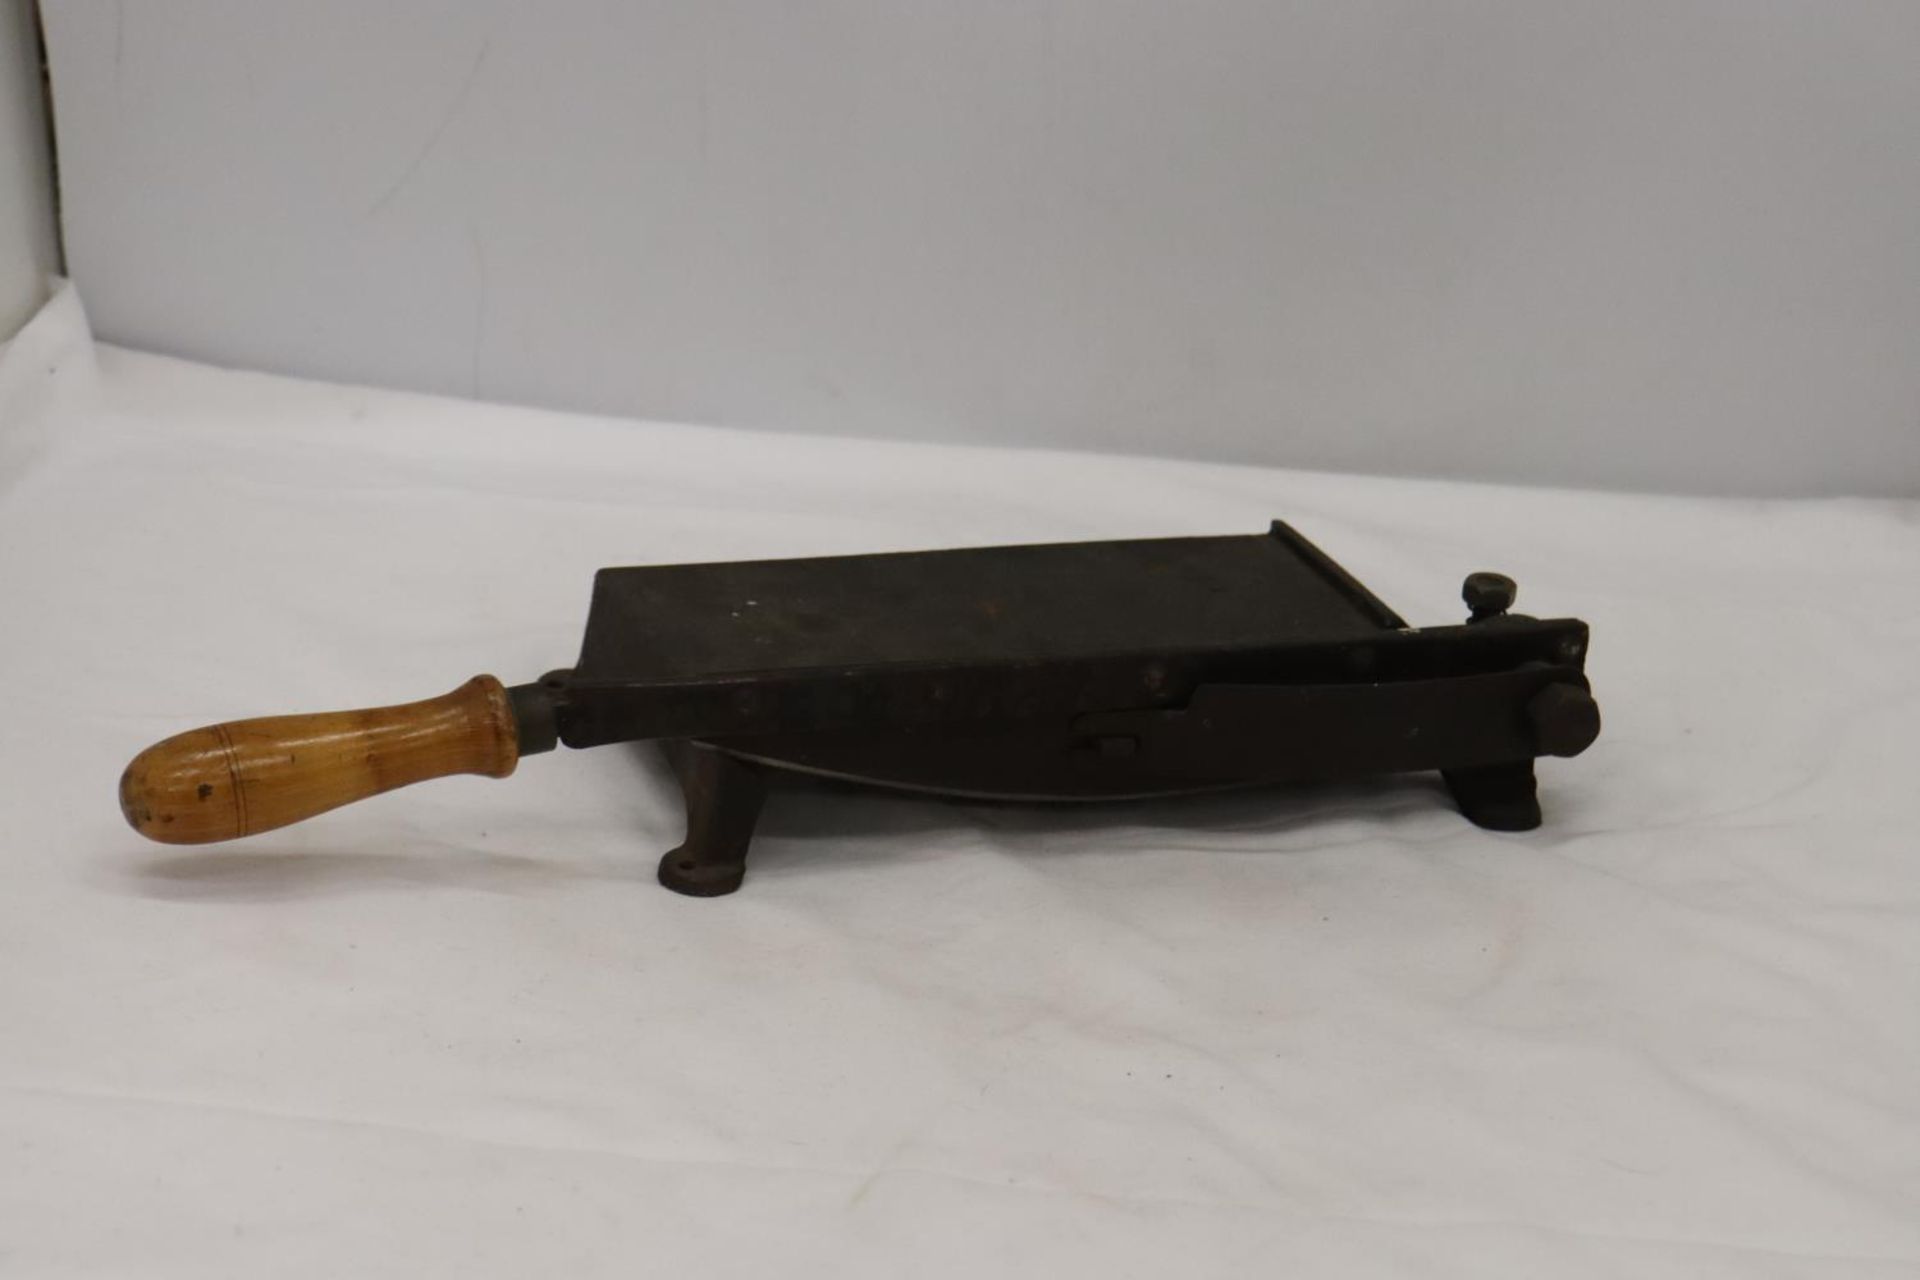 A VERY SHARP VINTAGE CAST GUILLOTINE - Image 6 of 7